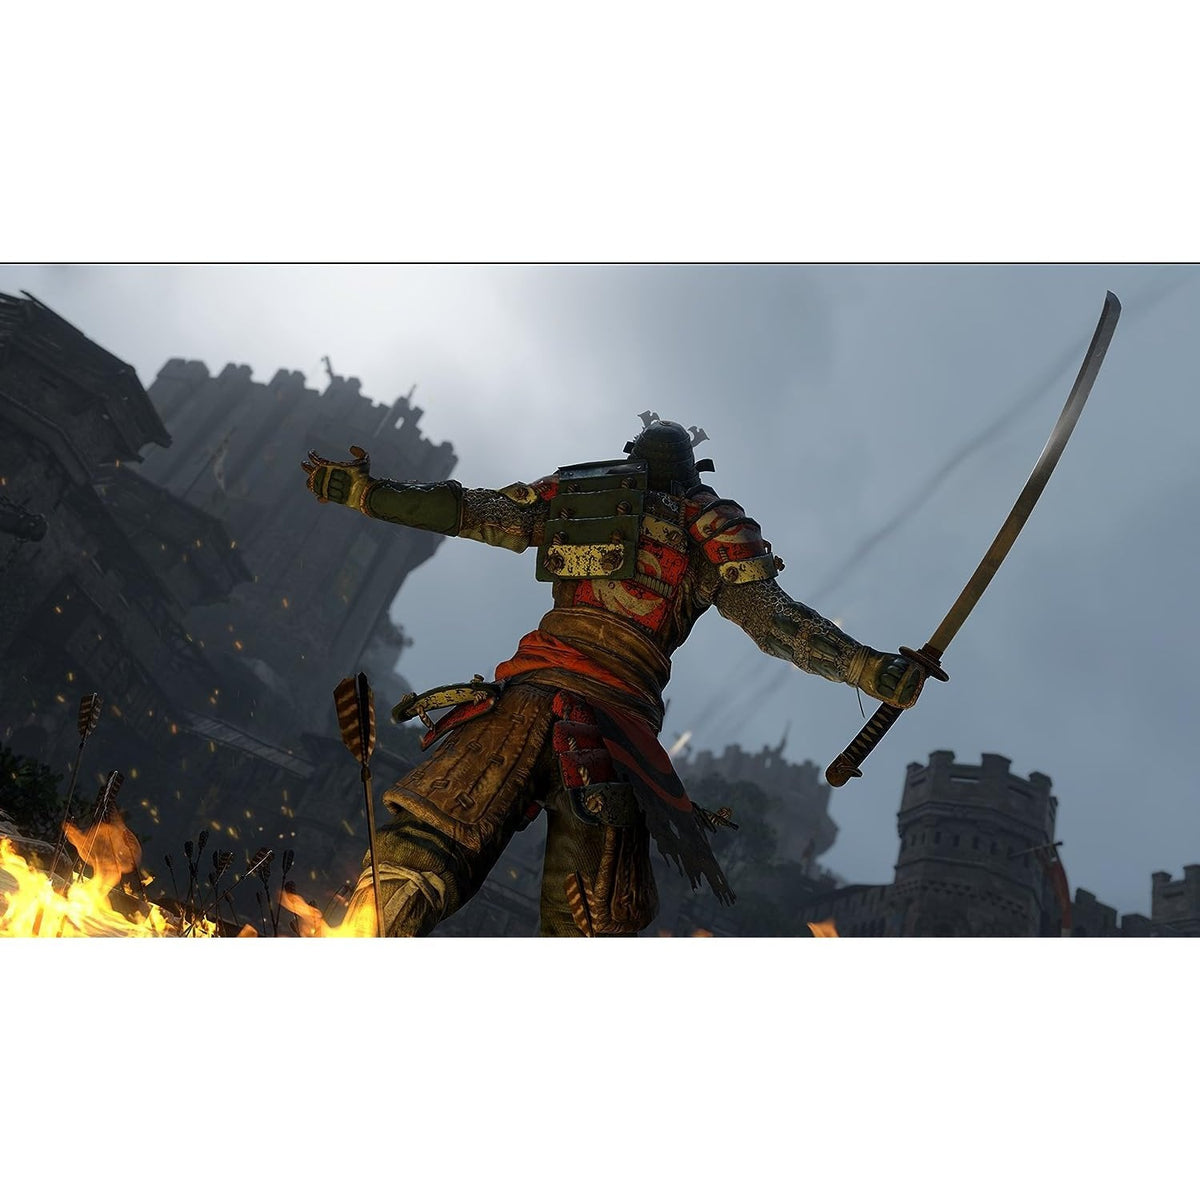 For Honor Xbox One & Xbox Series X